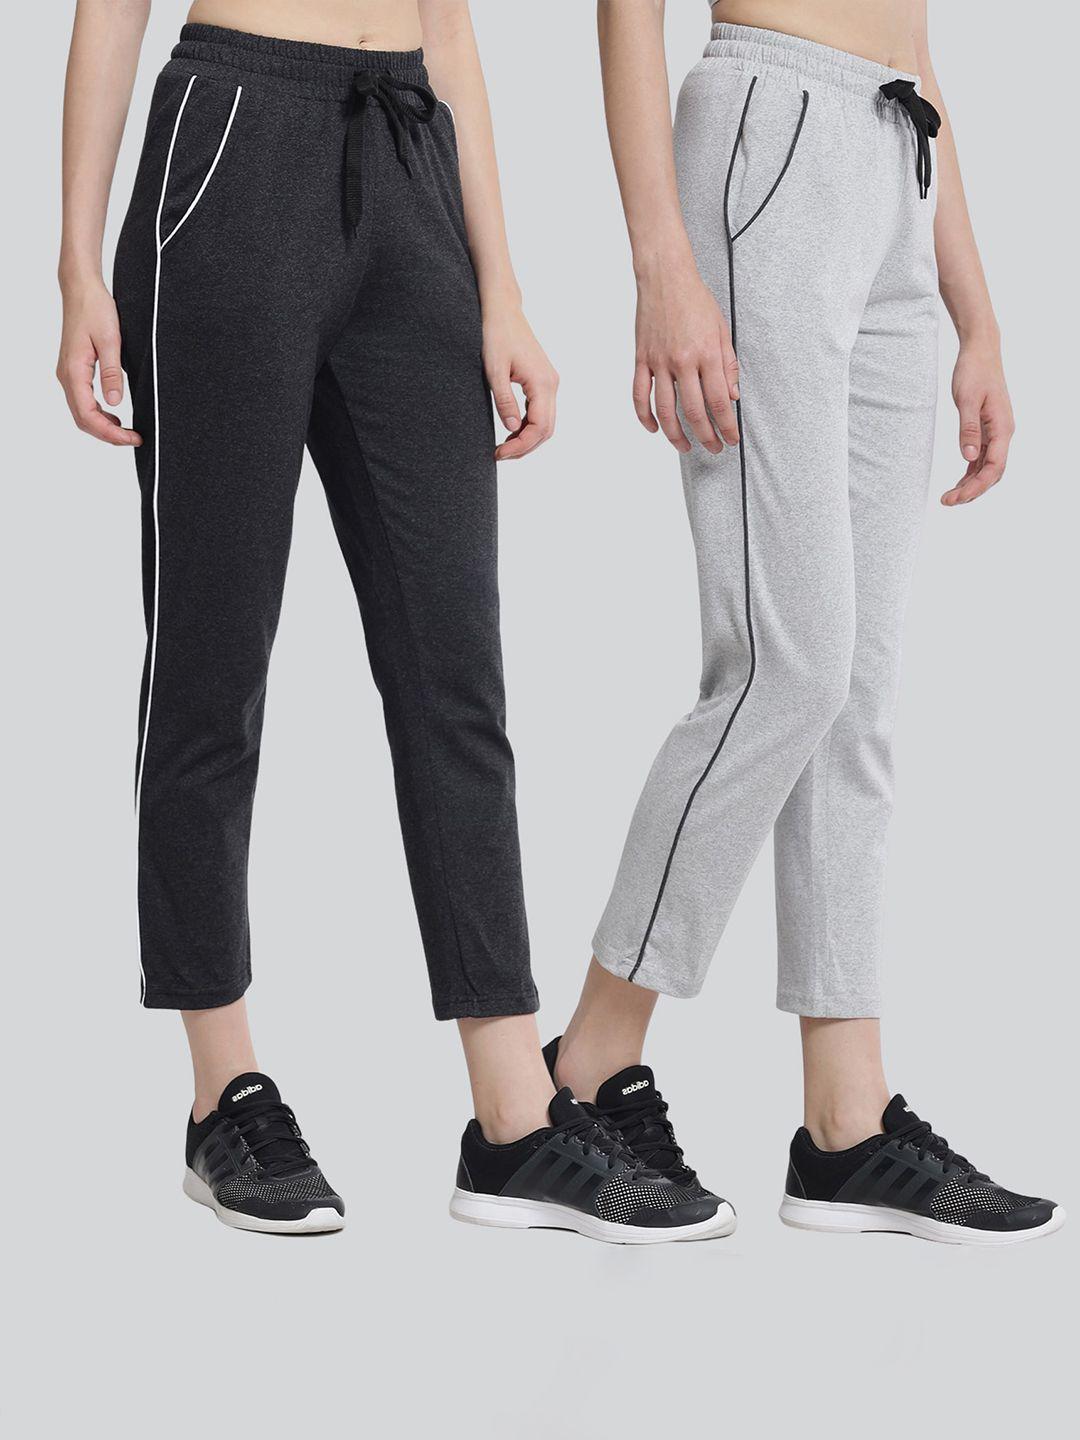 q-rious women pack of 2 grey & black solid pure cotton track pants